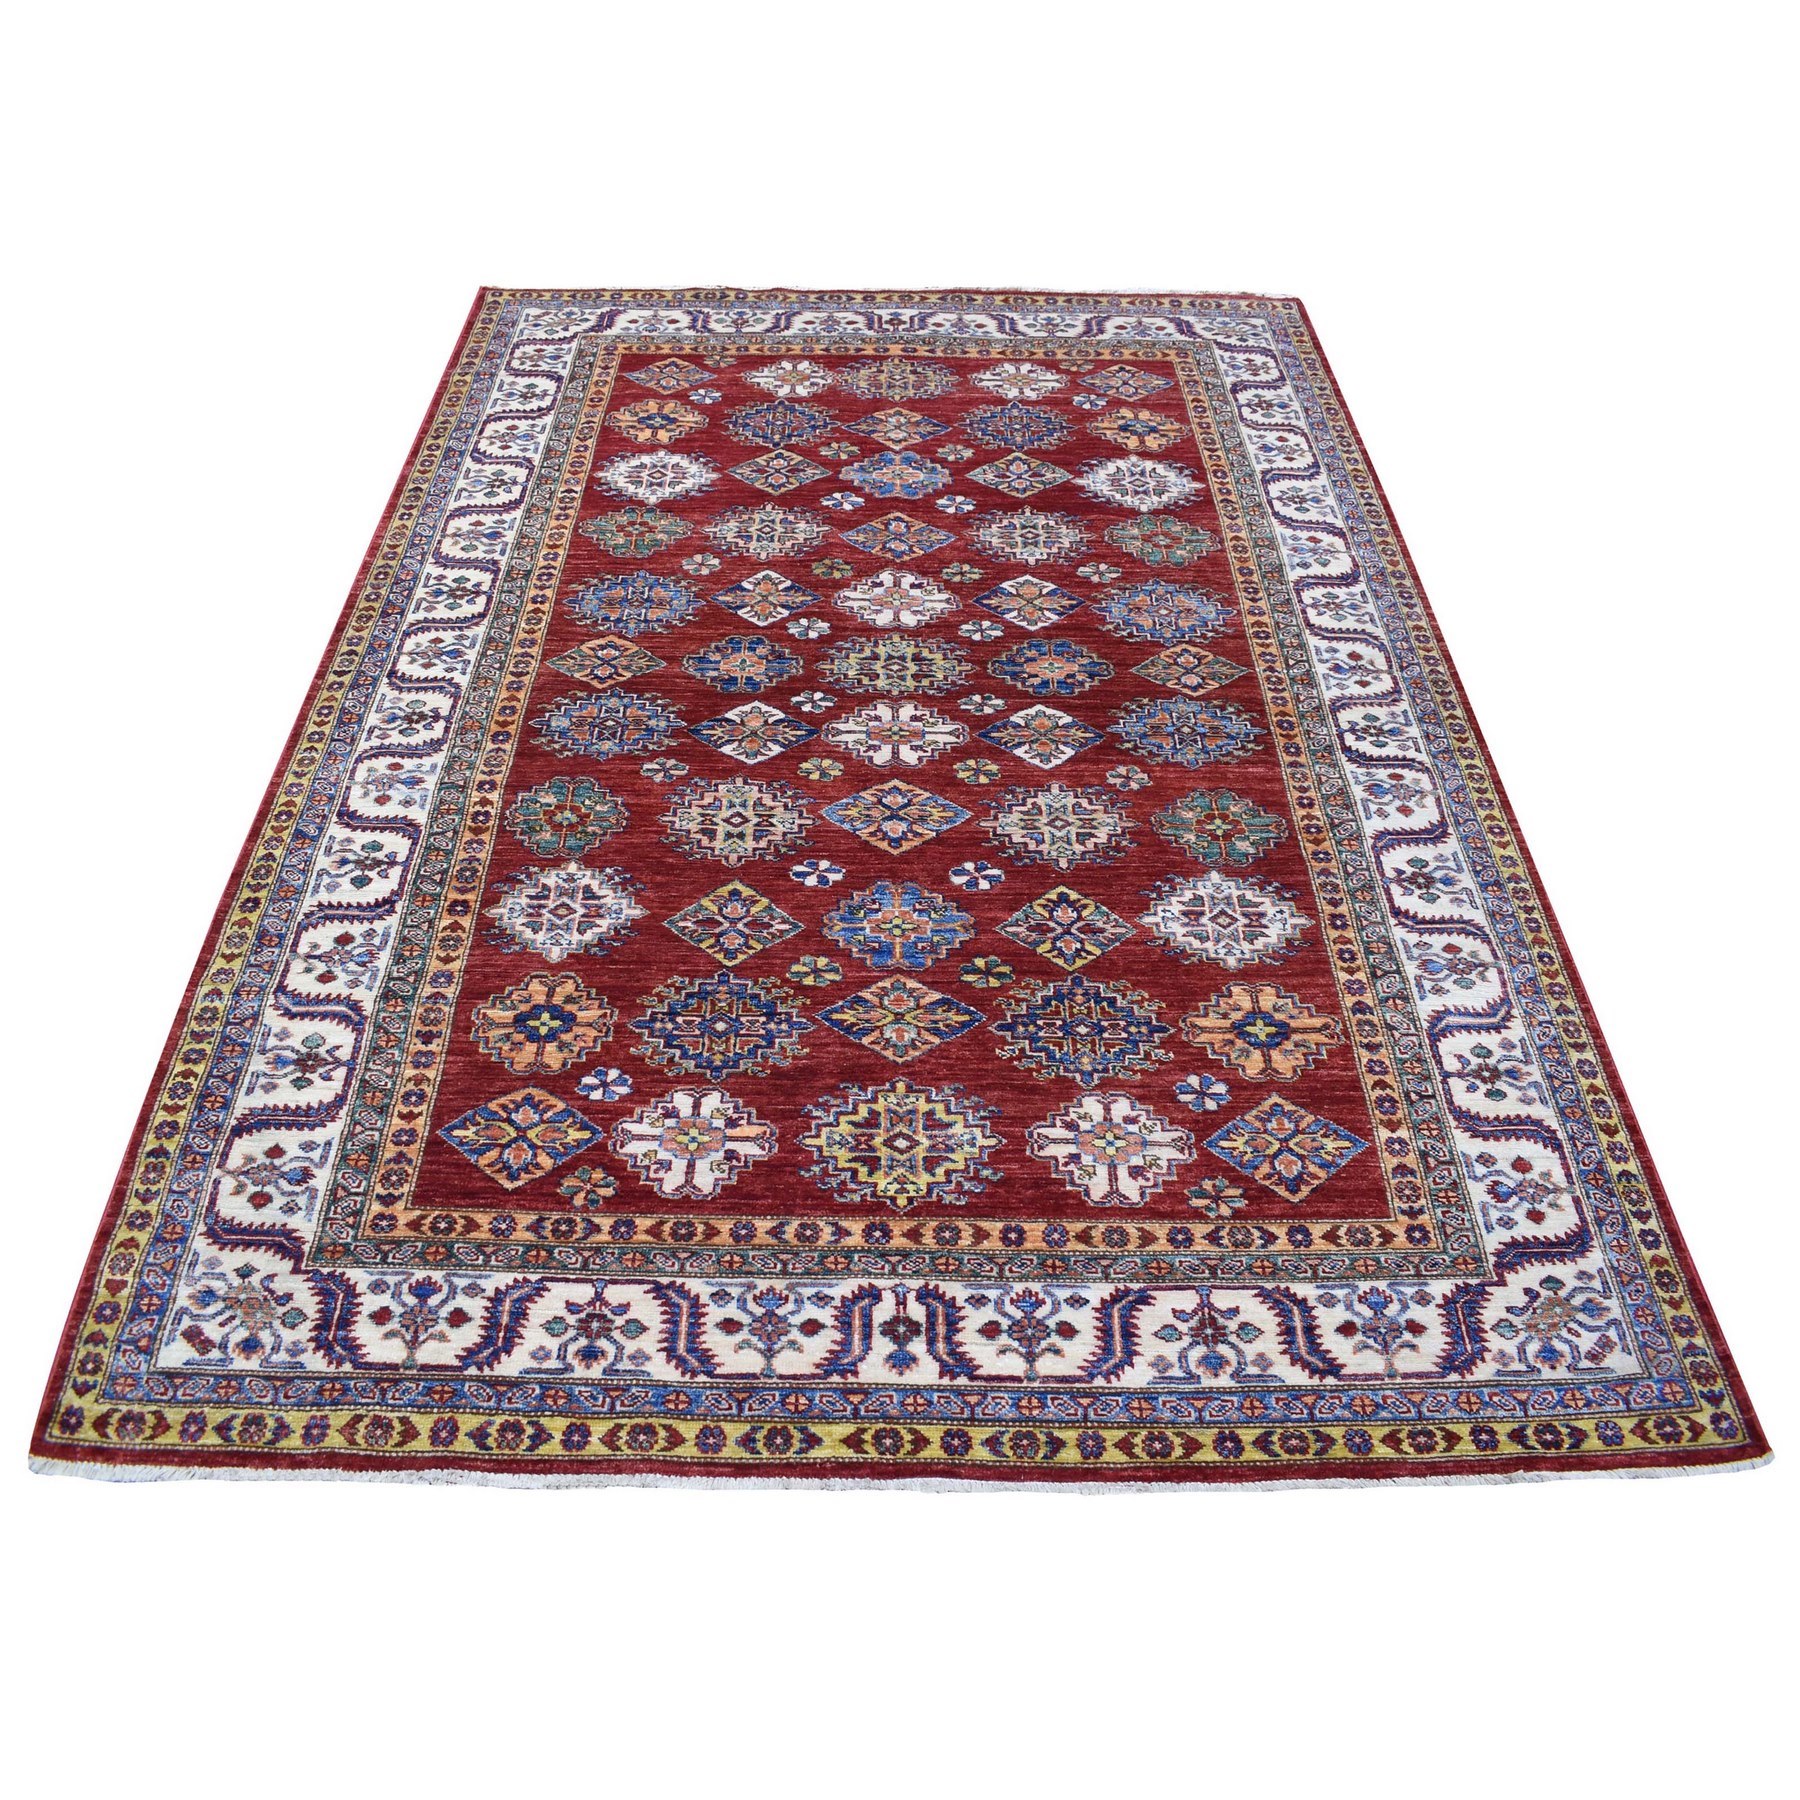 Caucasian Collection Hand Woven Red Rug No: 1135240